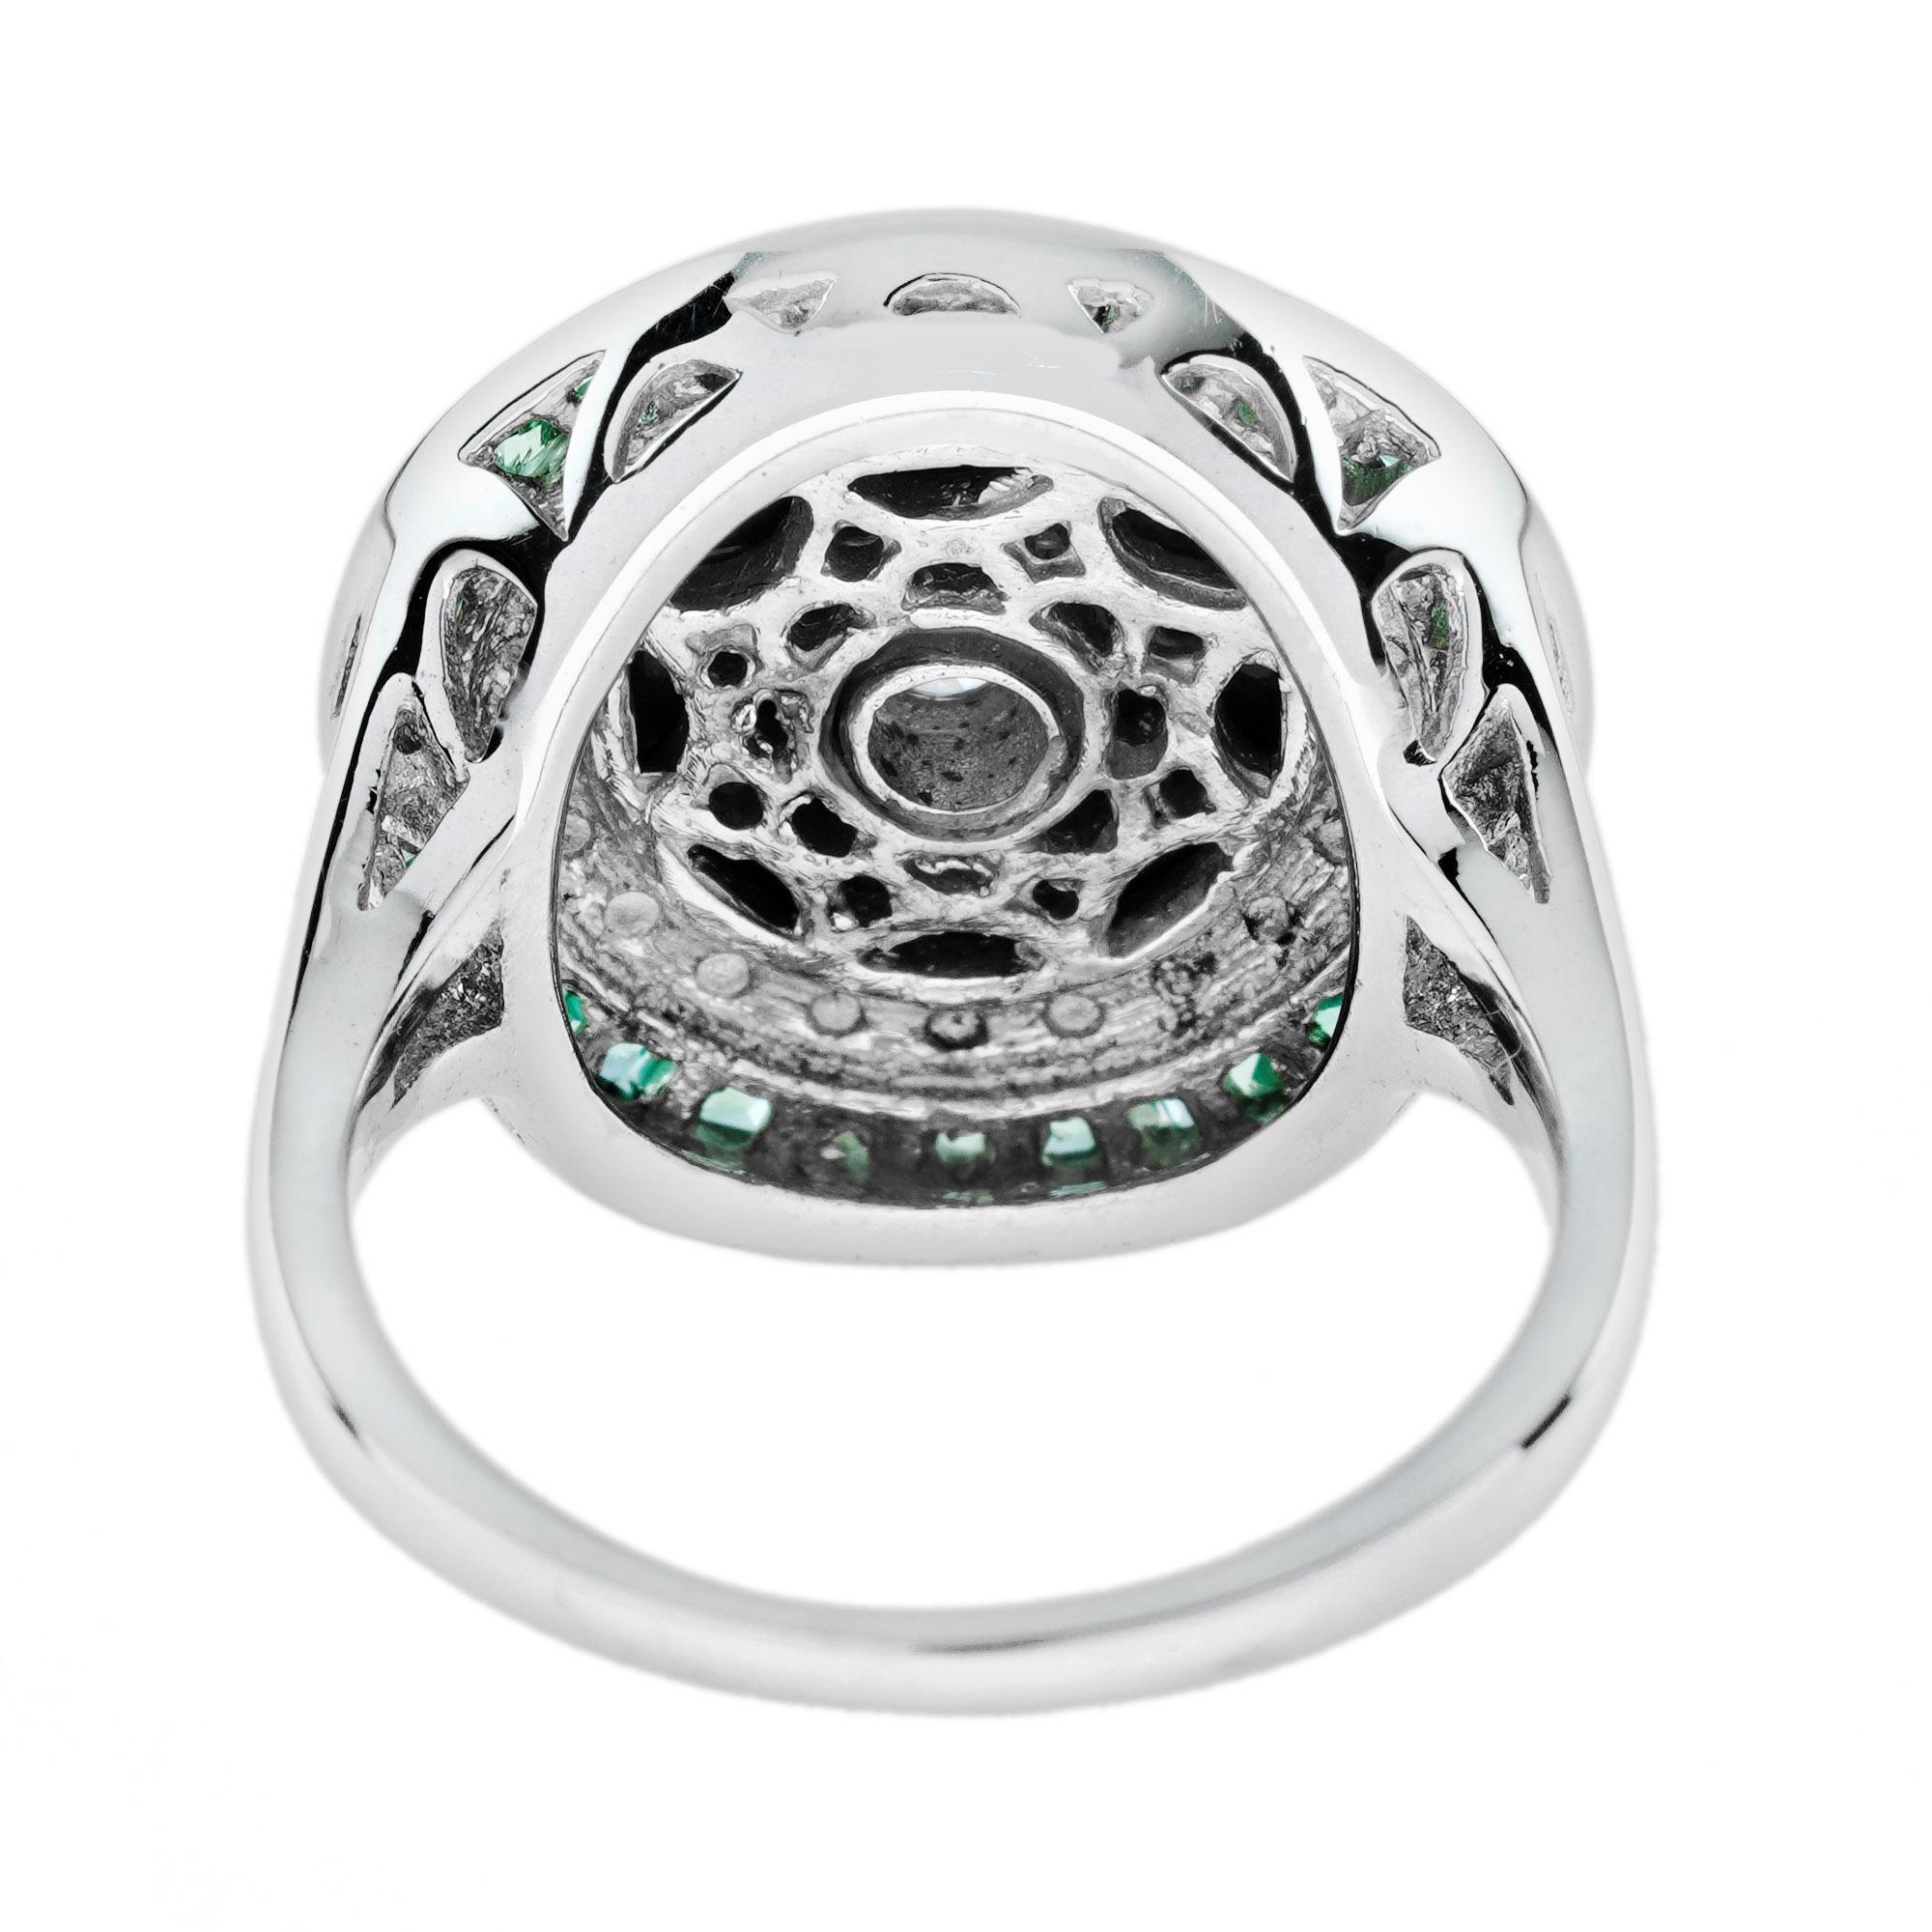 For Sale:  Diamond Onyx Emerald Art Deco Style Target Cocktail Ring in 14K White Gold 5